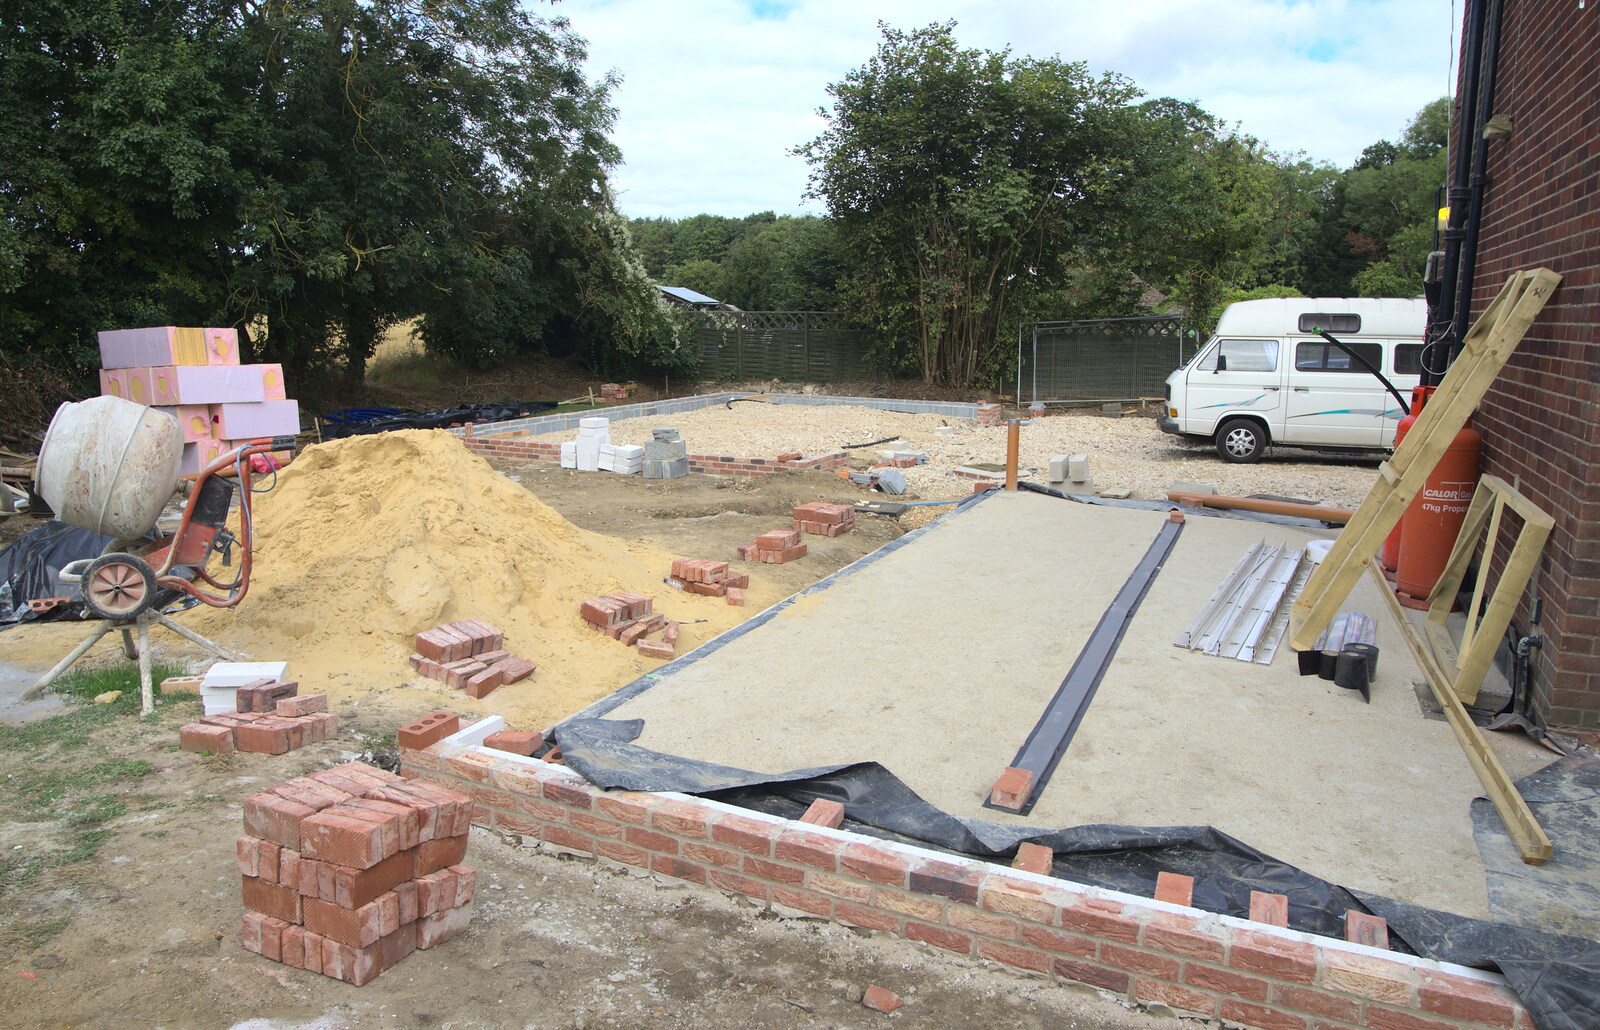 The side extension and garage from Bressingham Gardens, and Building Progress, Brome, Suffolk - 26th August 2013